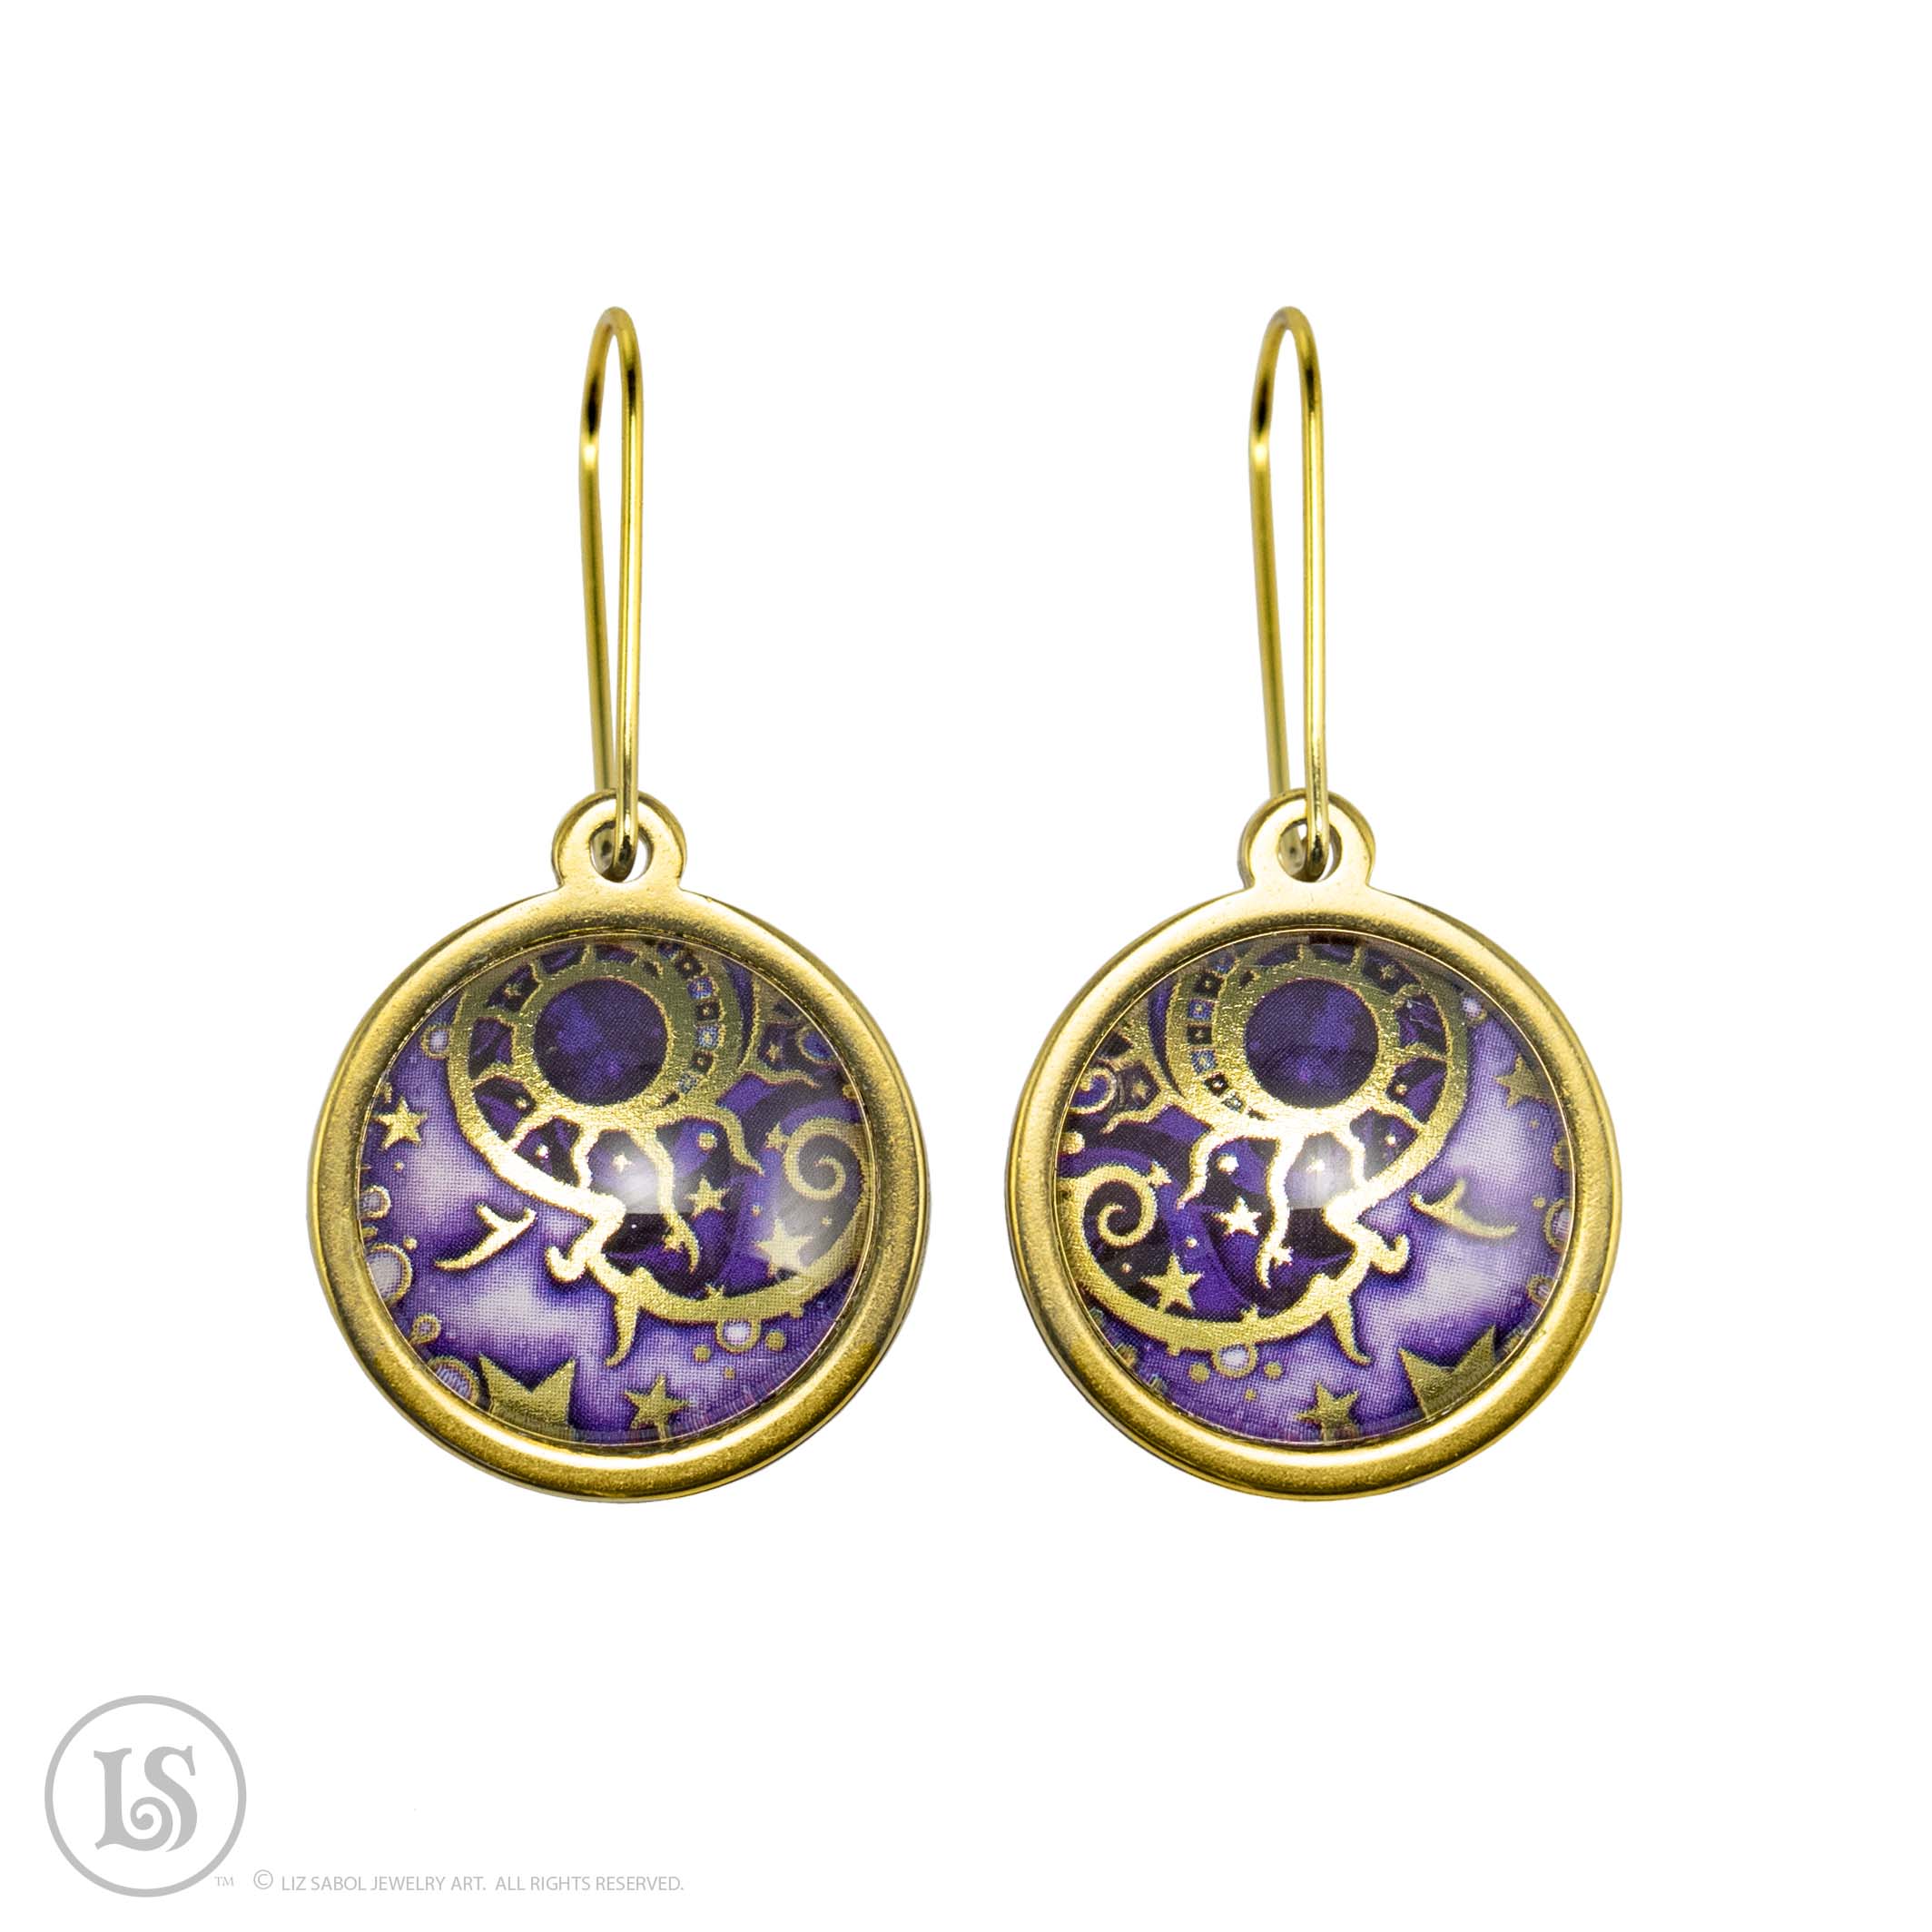 Man in the Moon Purple,  Earrings, Gold-tone, Glass, Gold-plated Stainless Steel